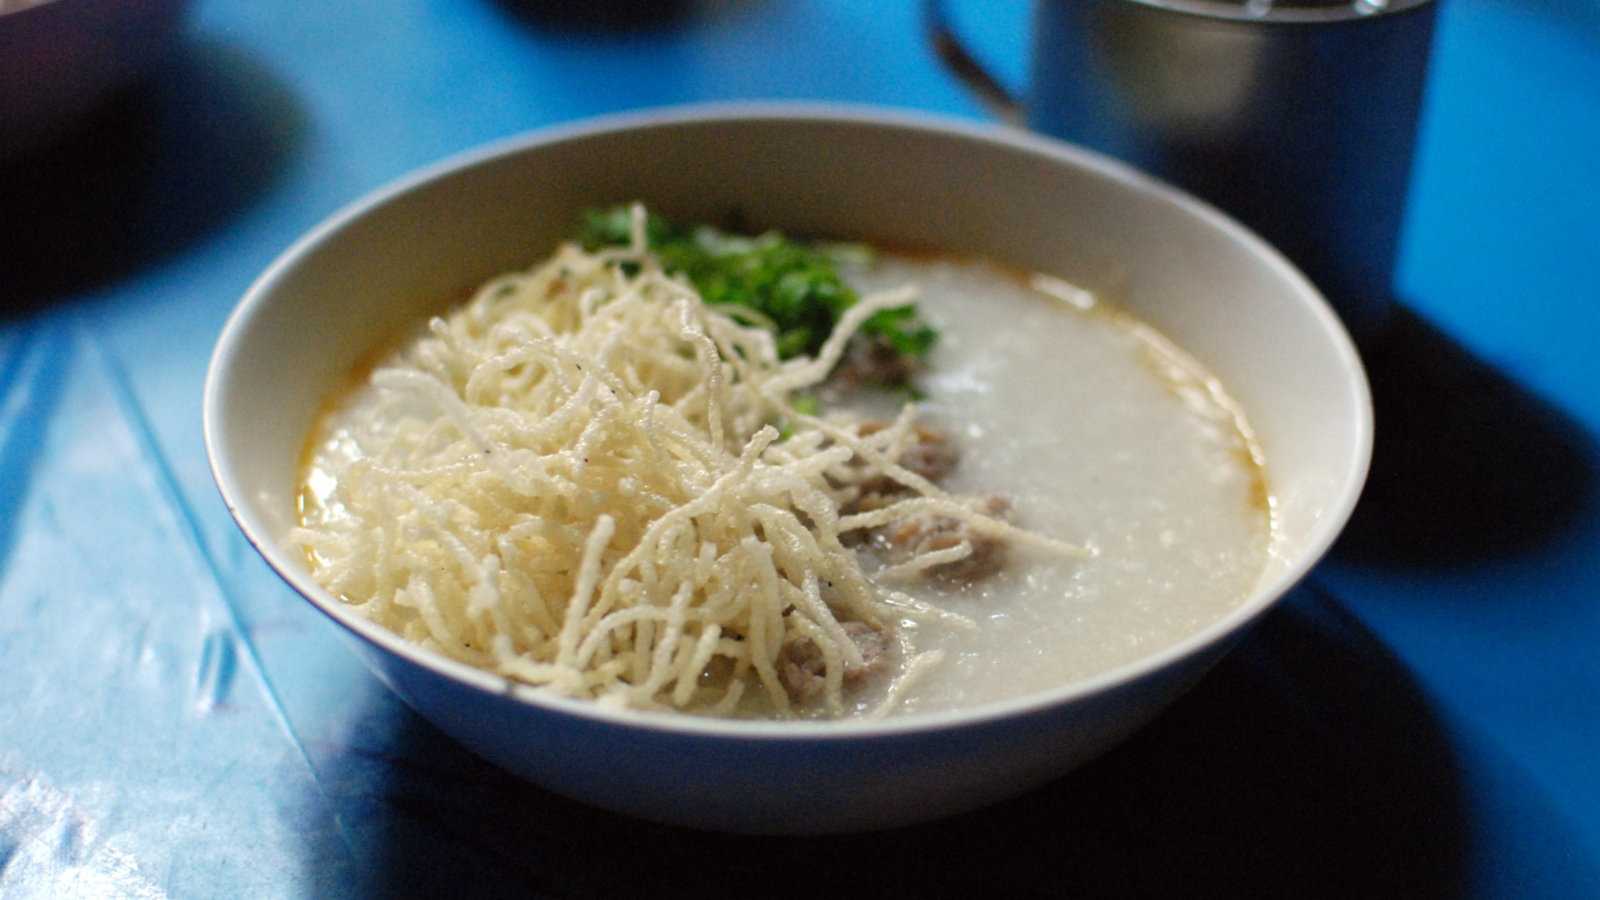 Jok is the Thai version of a rice porridge or congee, and usually served for breakfast